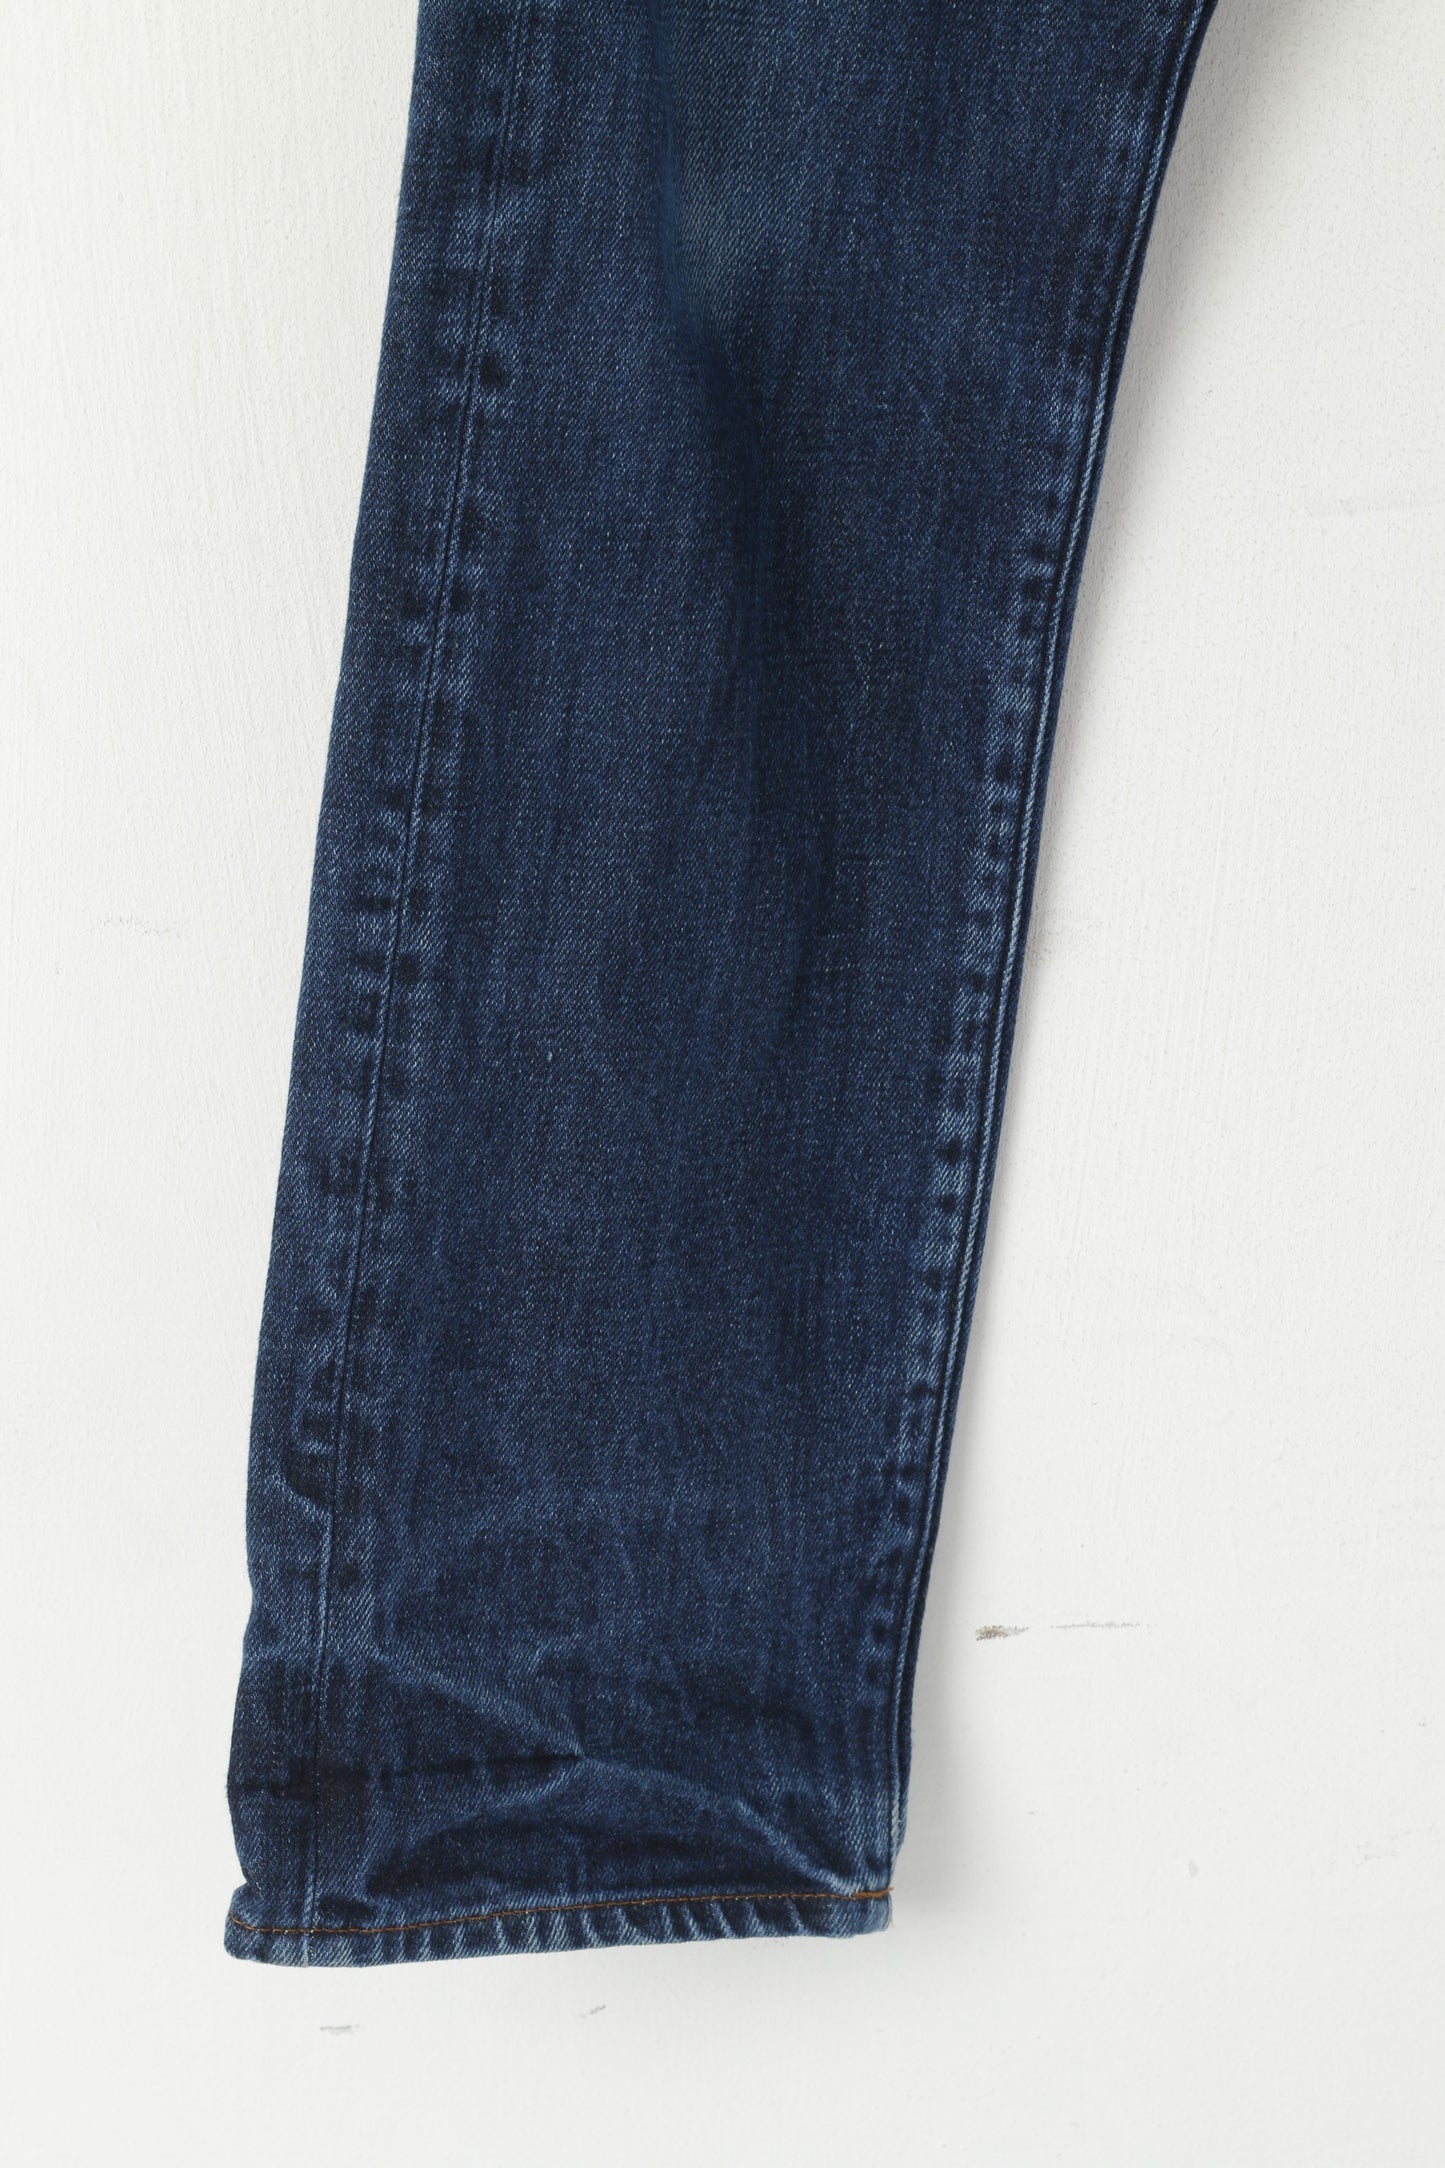 G-Star Raw Men 31 Jeans Trousers Navy Denim Cotton 3301 Tapered Pants